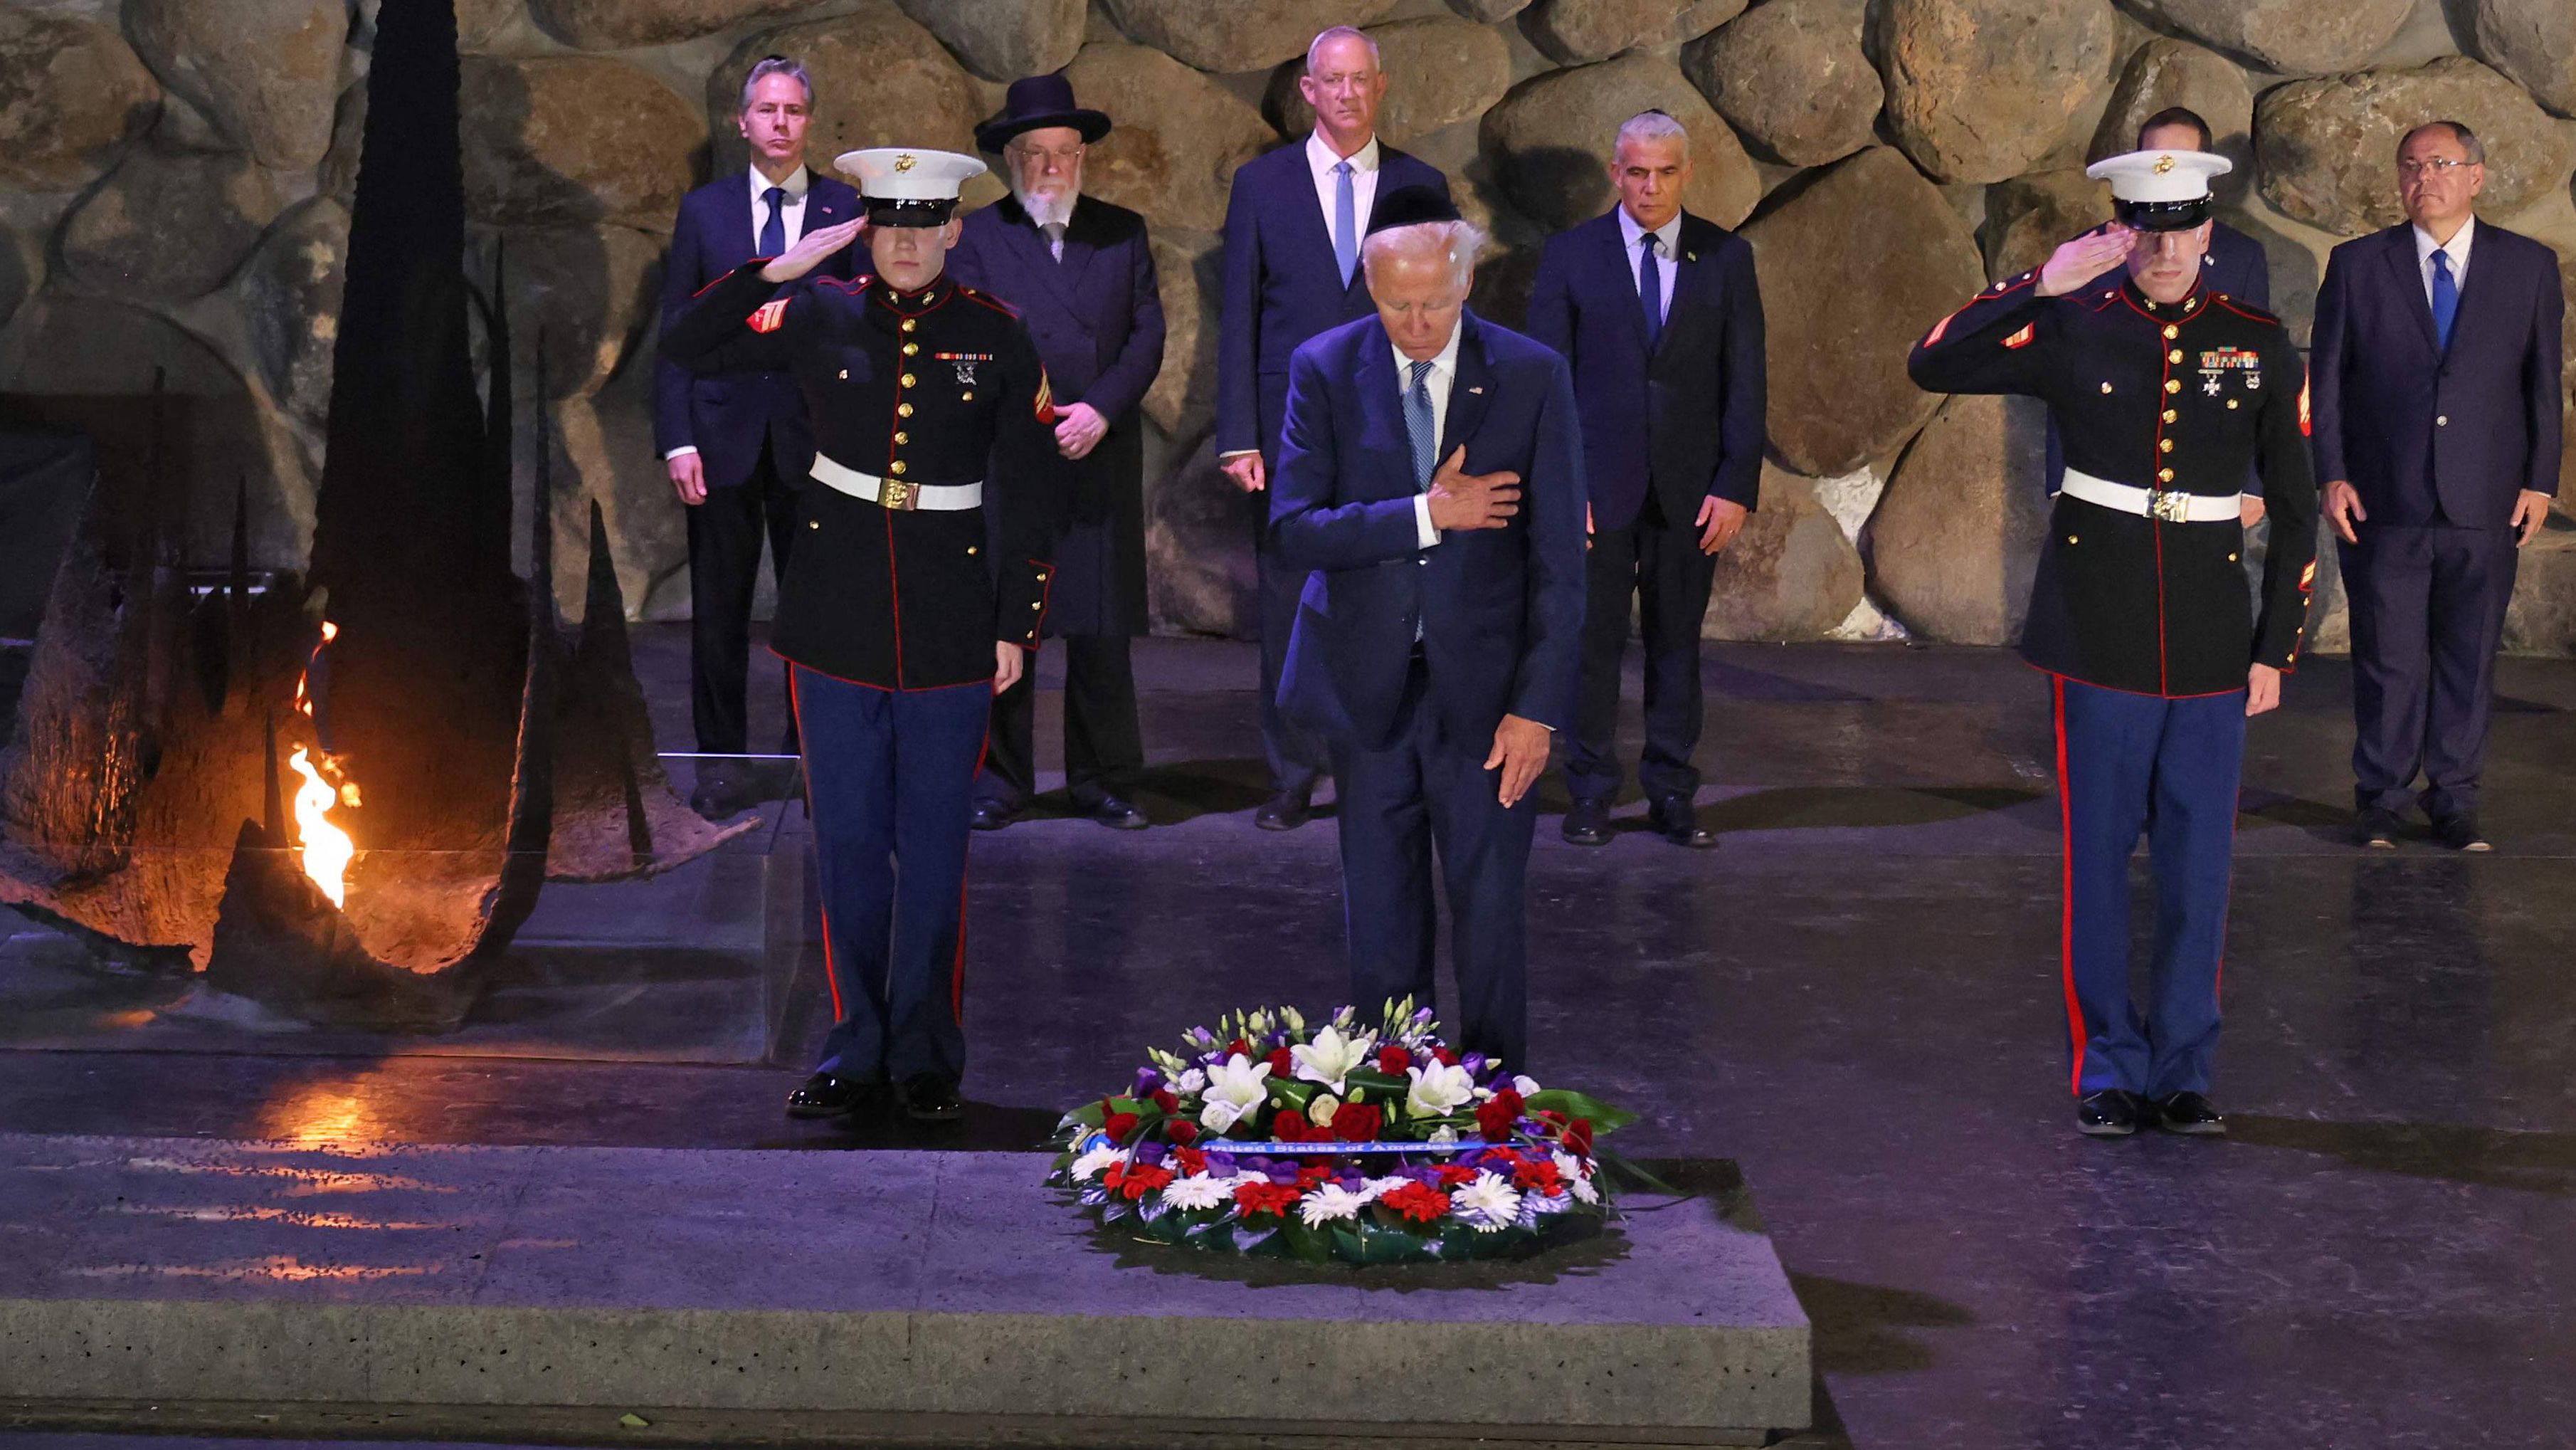 Biden lays a wreath Wednesday at the Yad Vashem Holocaust Remembrance Center in Jerusalem.